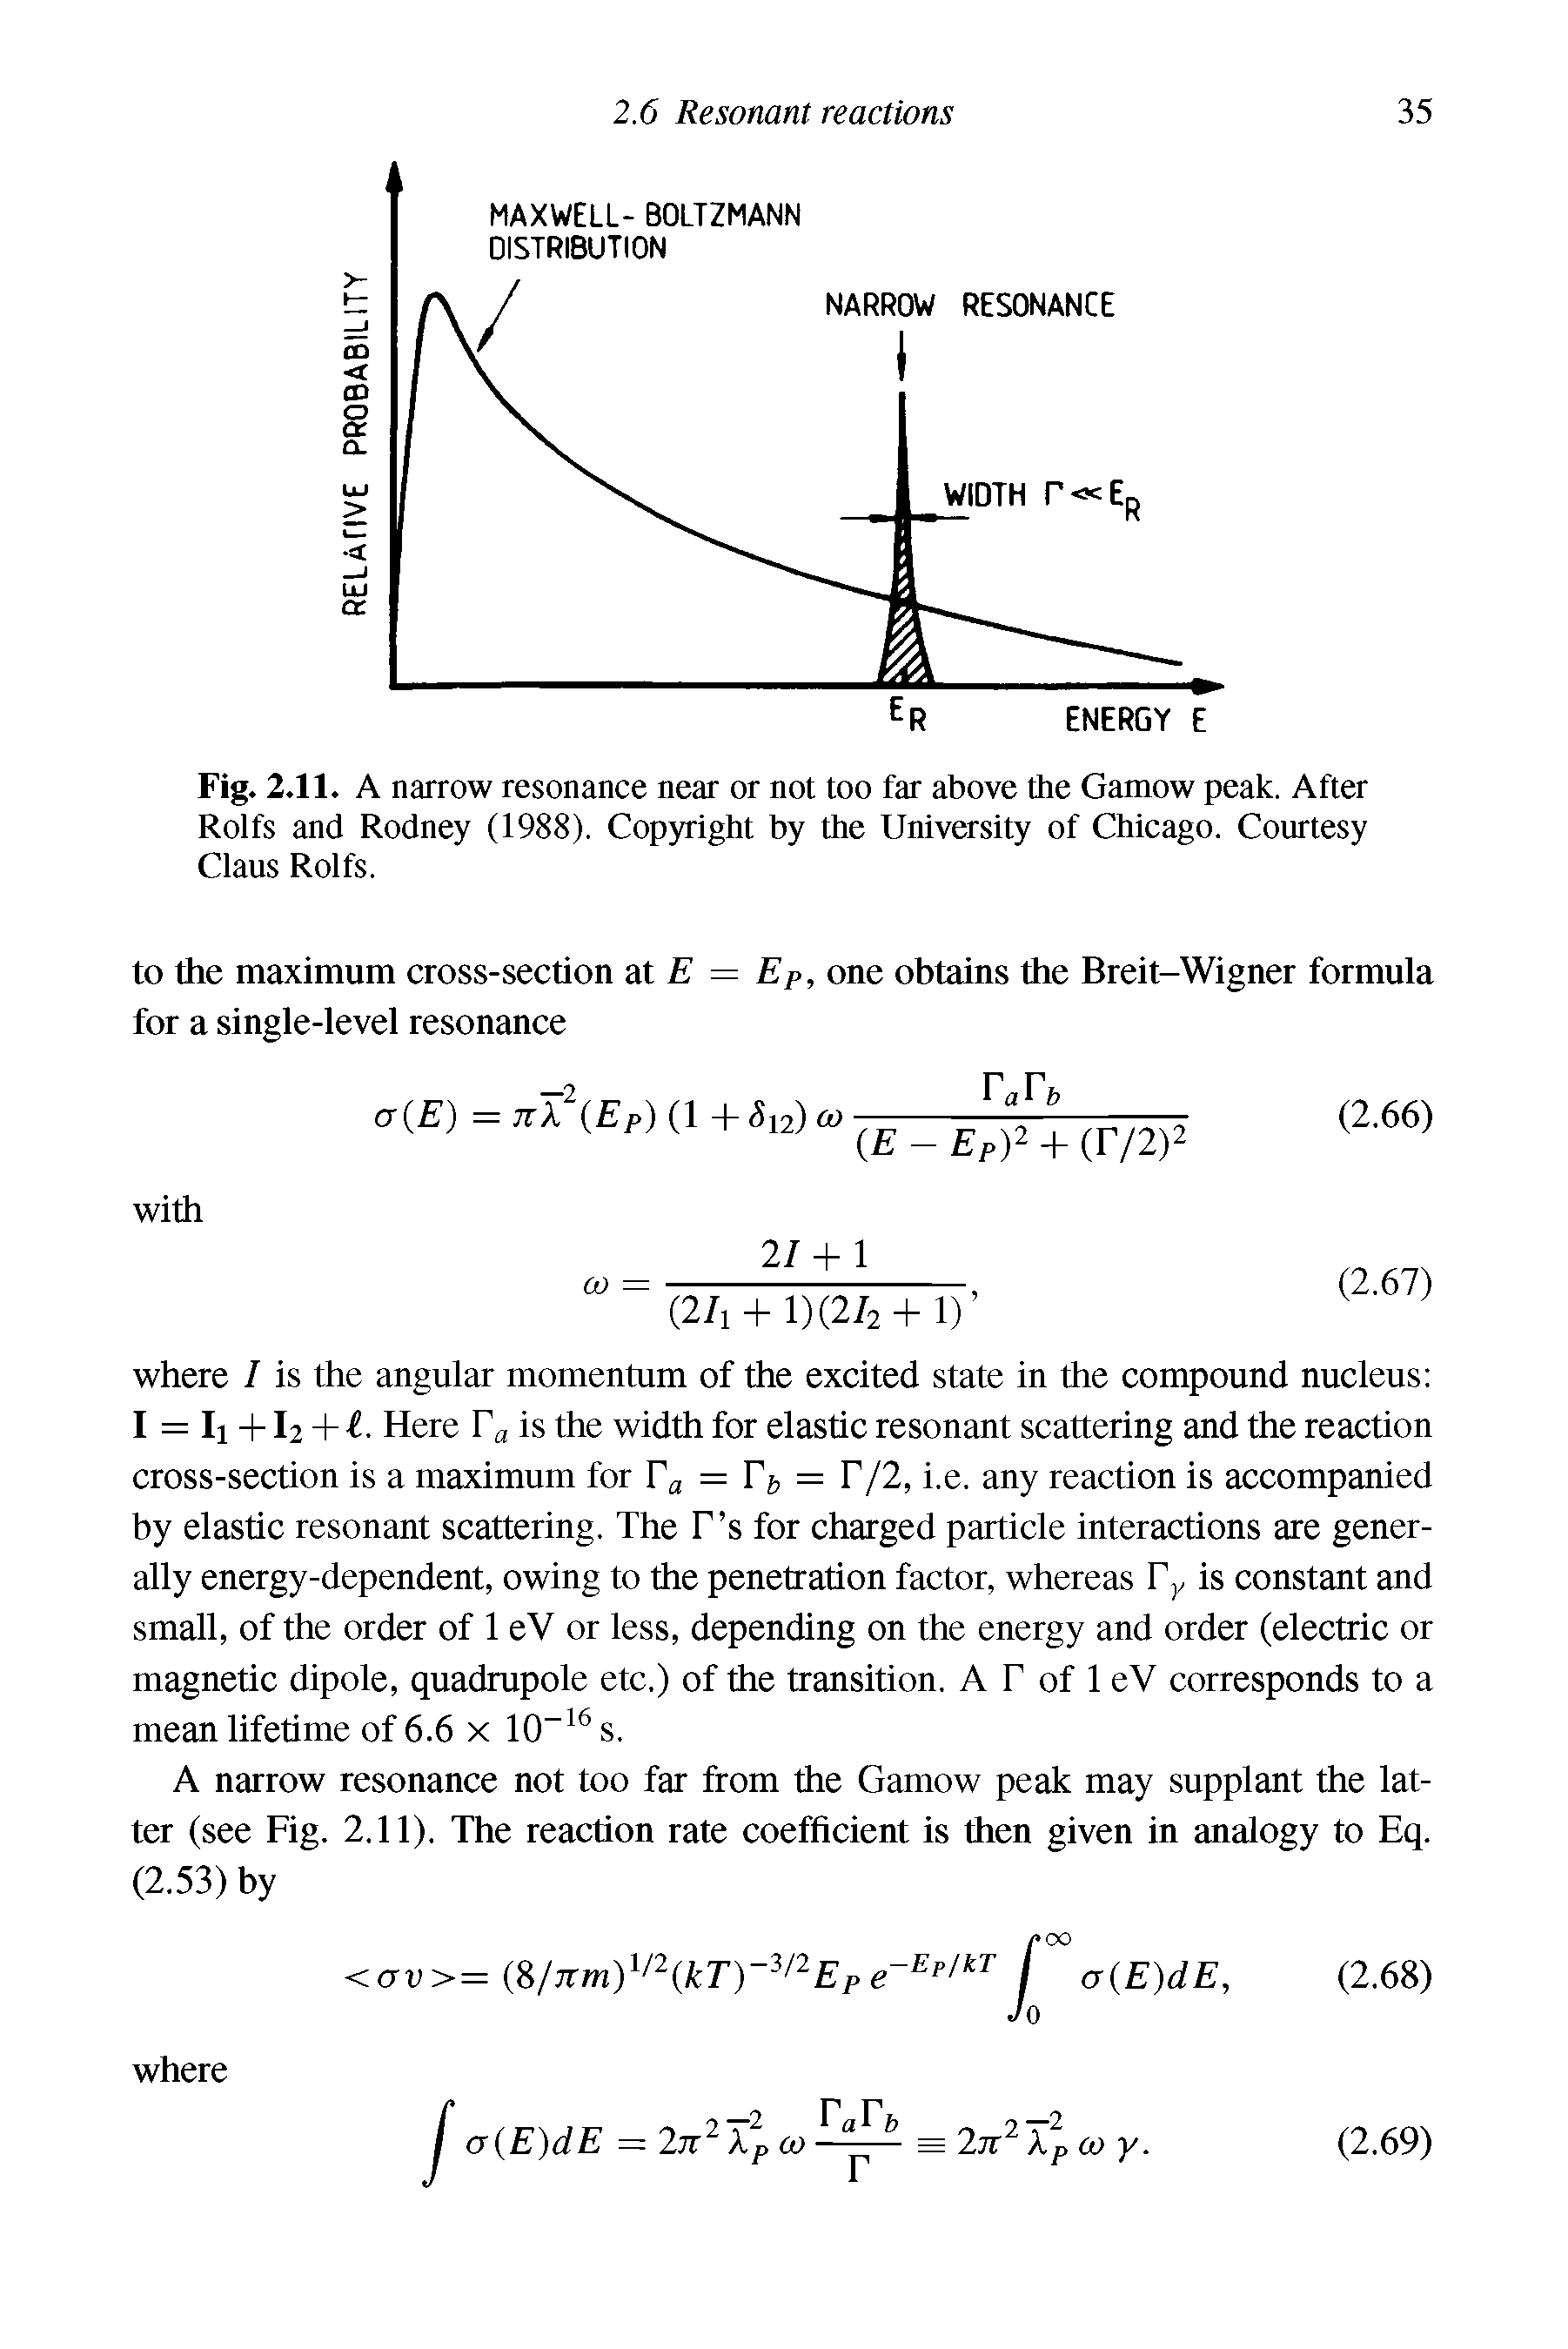 Fig. 2.11. A narrow resonance near or not too far above the Gamow peak. After Rolfs and Rodney (1988). Copyright by the University of Chicago. Courtesy Claus Rolfs.